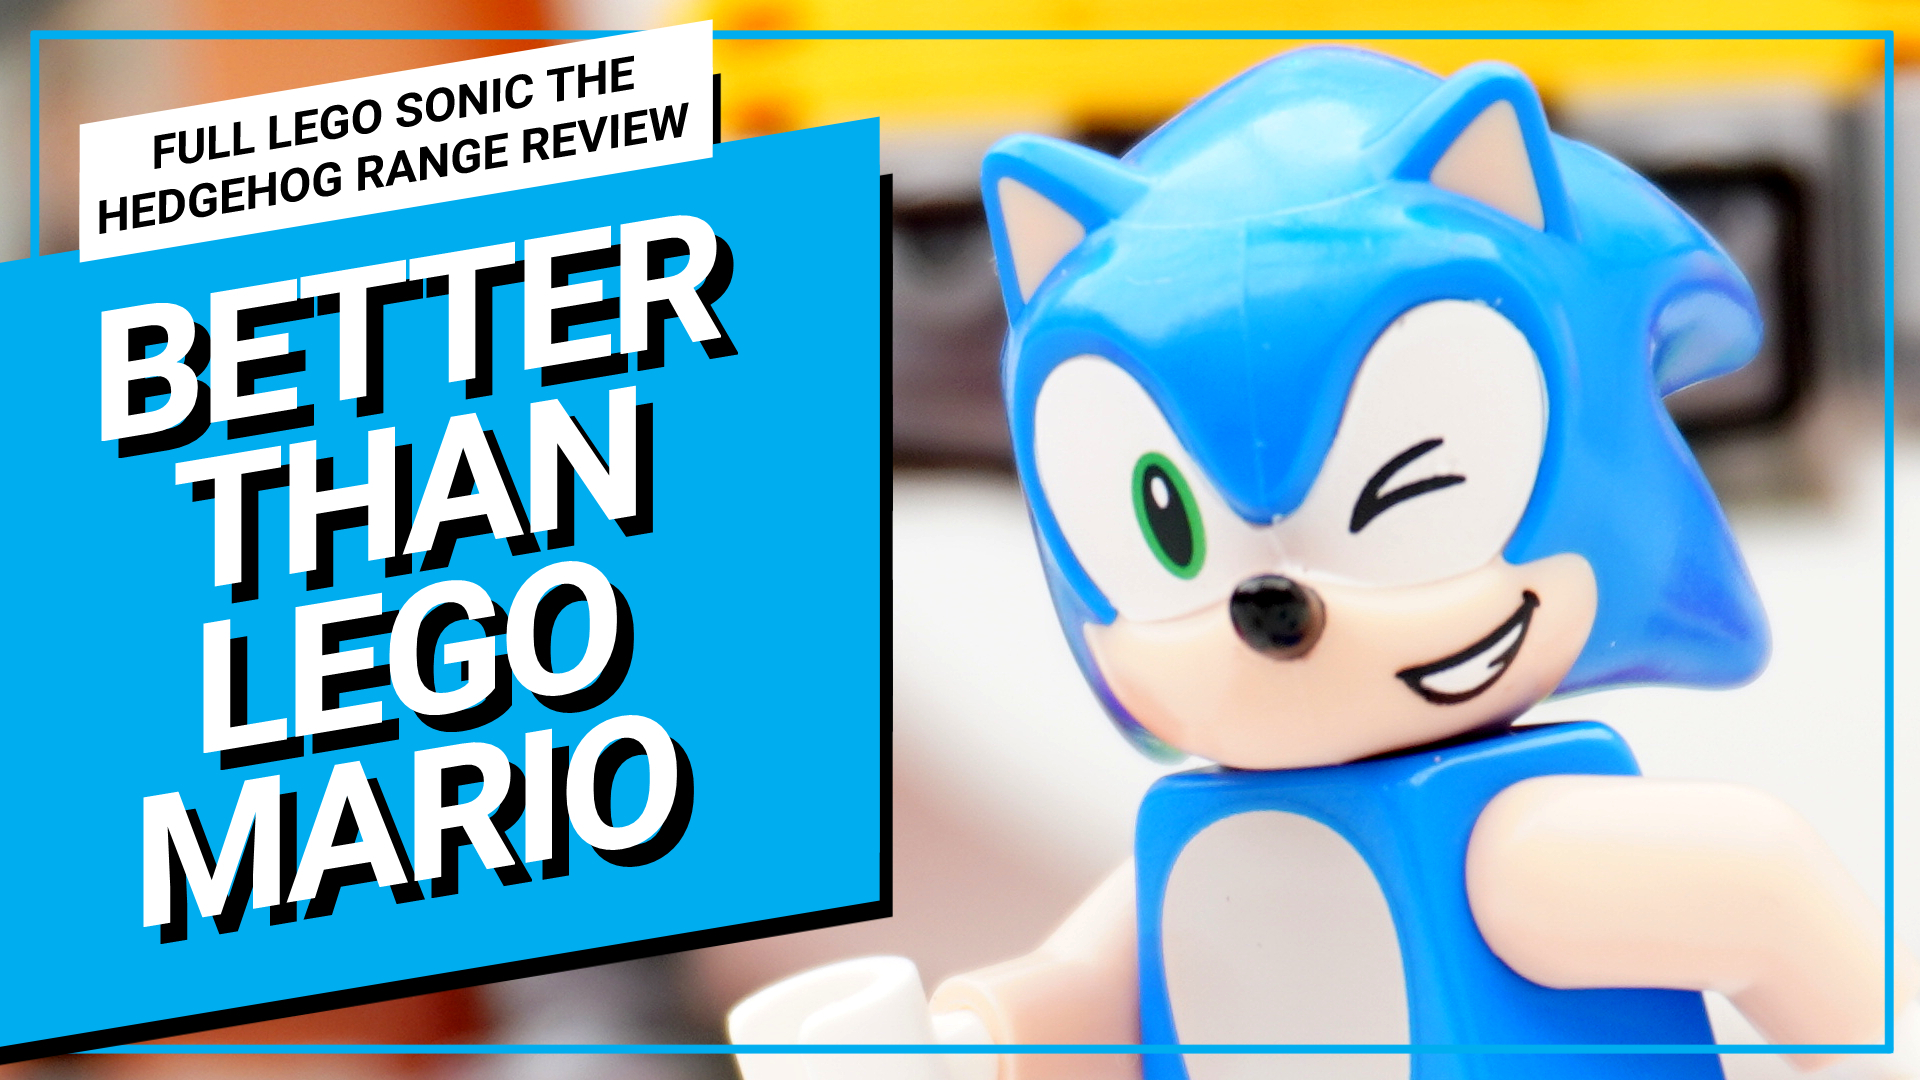 REVIEW! Lego Sonic - Oficina do Tails 